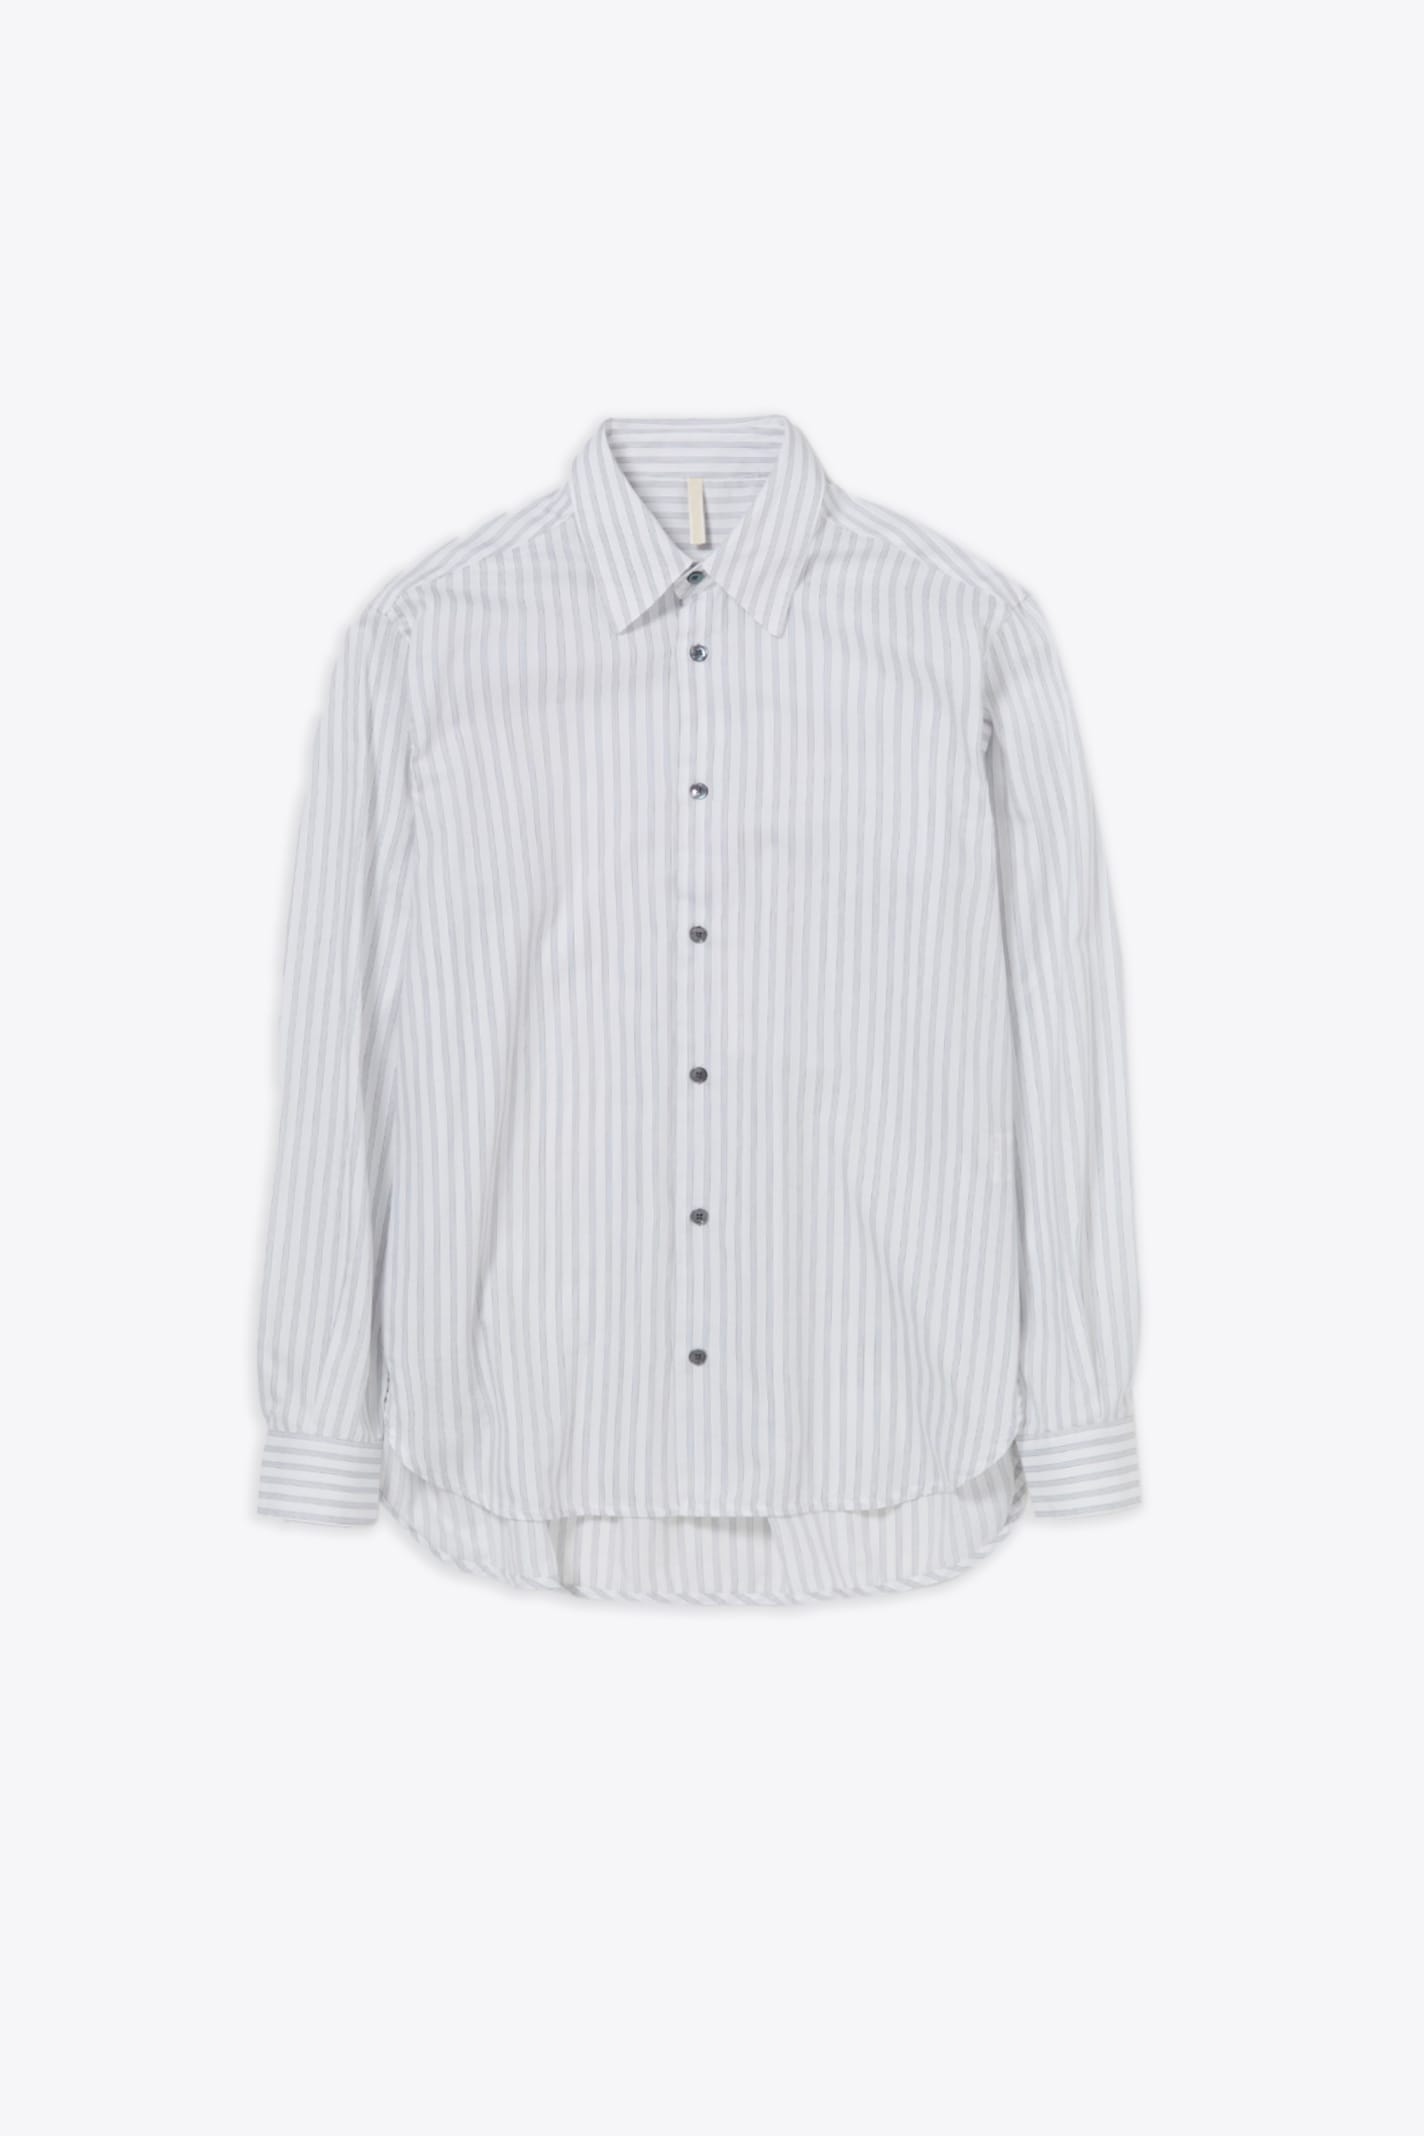 #1174 White striped poplin shirt with long sleeves - Please Shirt